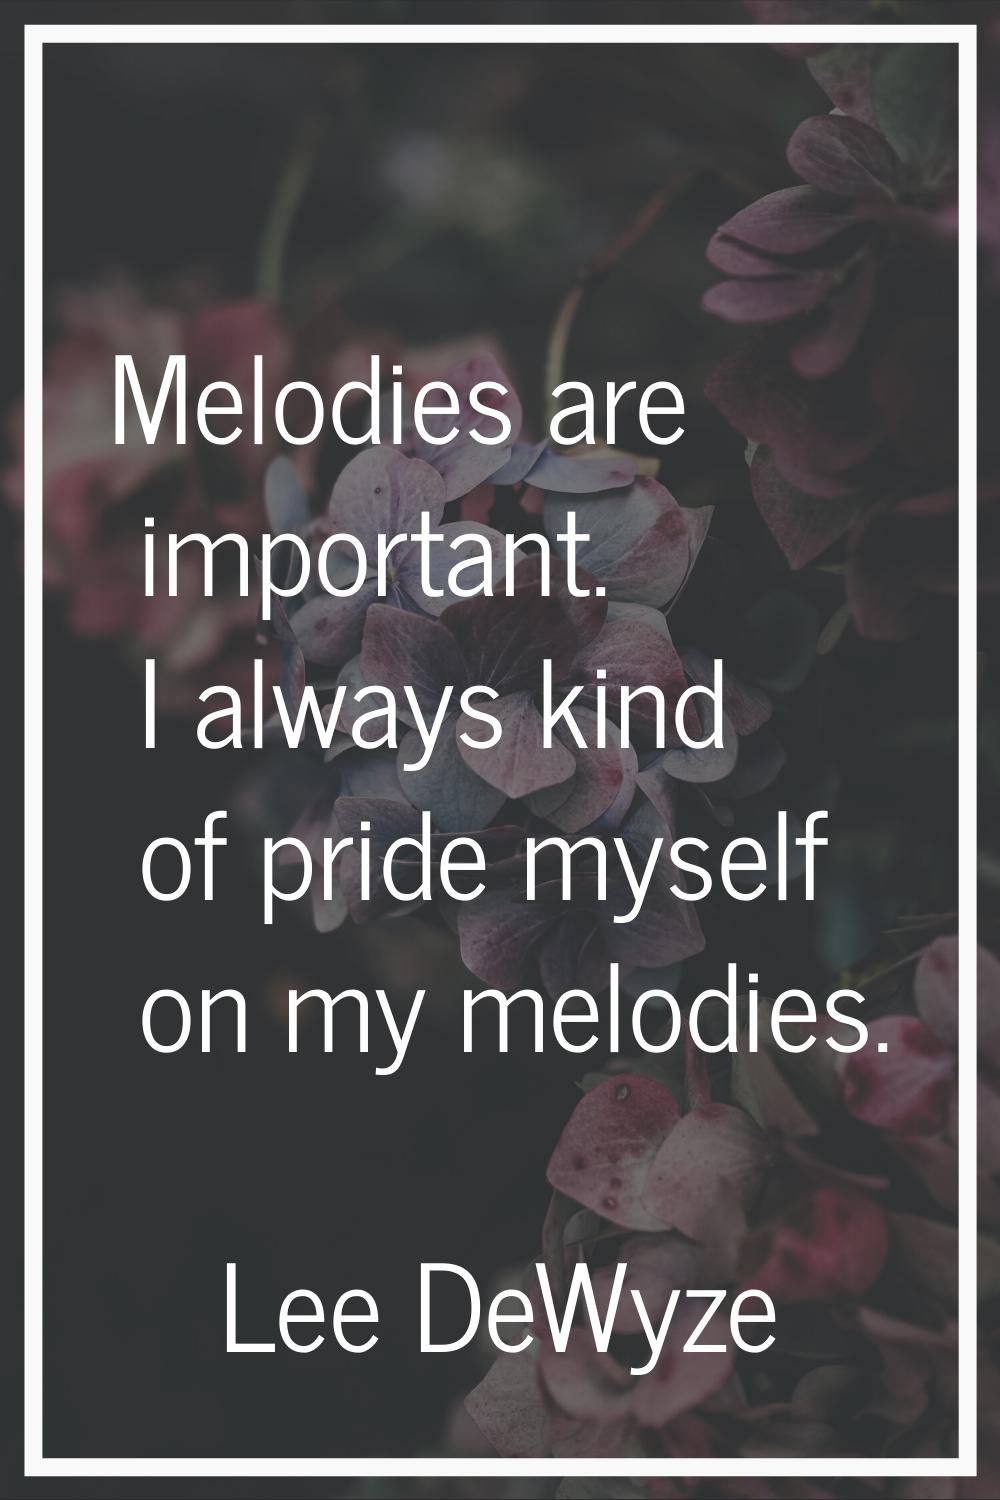 Melodies are important. I always kind of pride myself on my melodies.